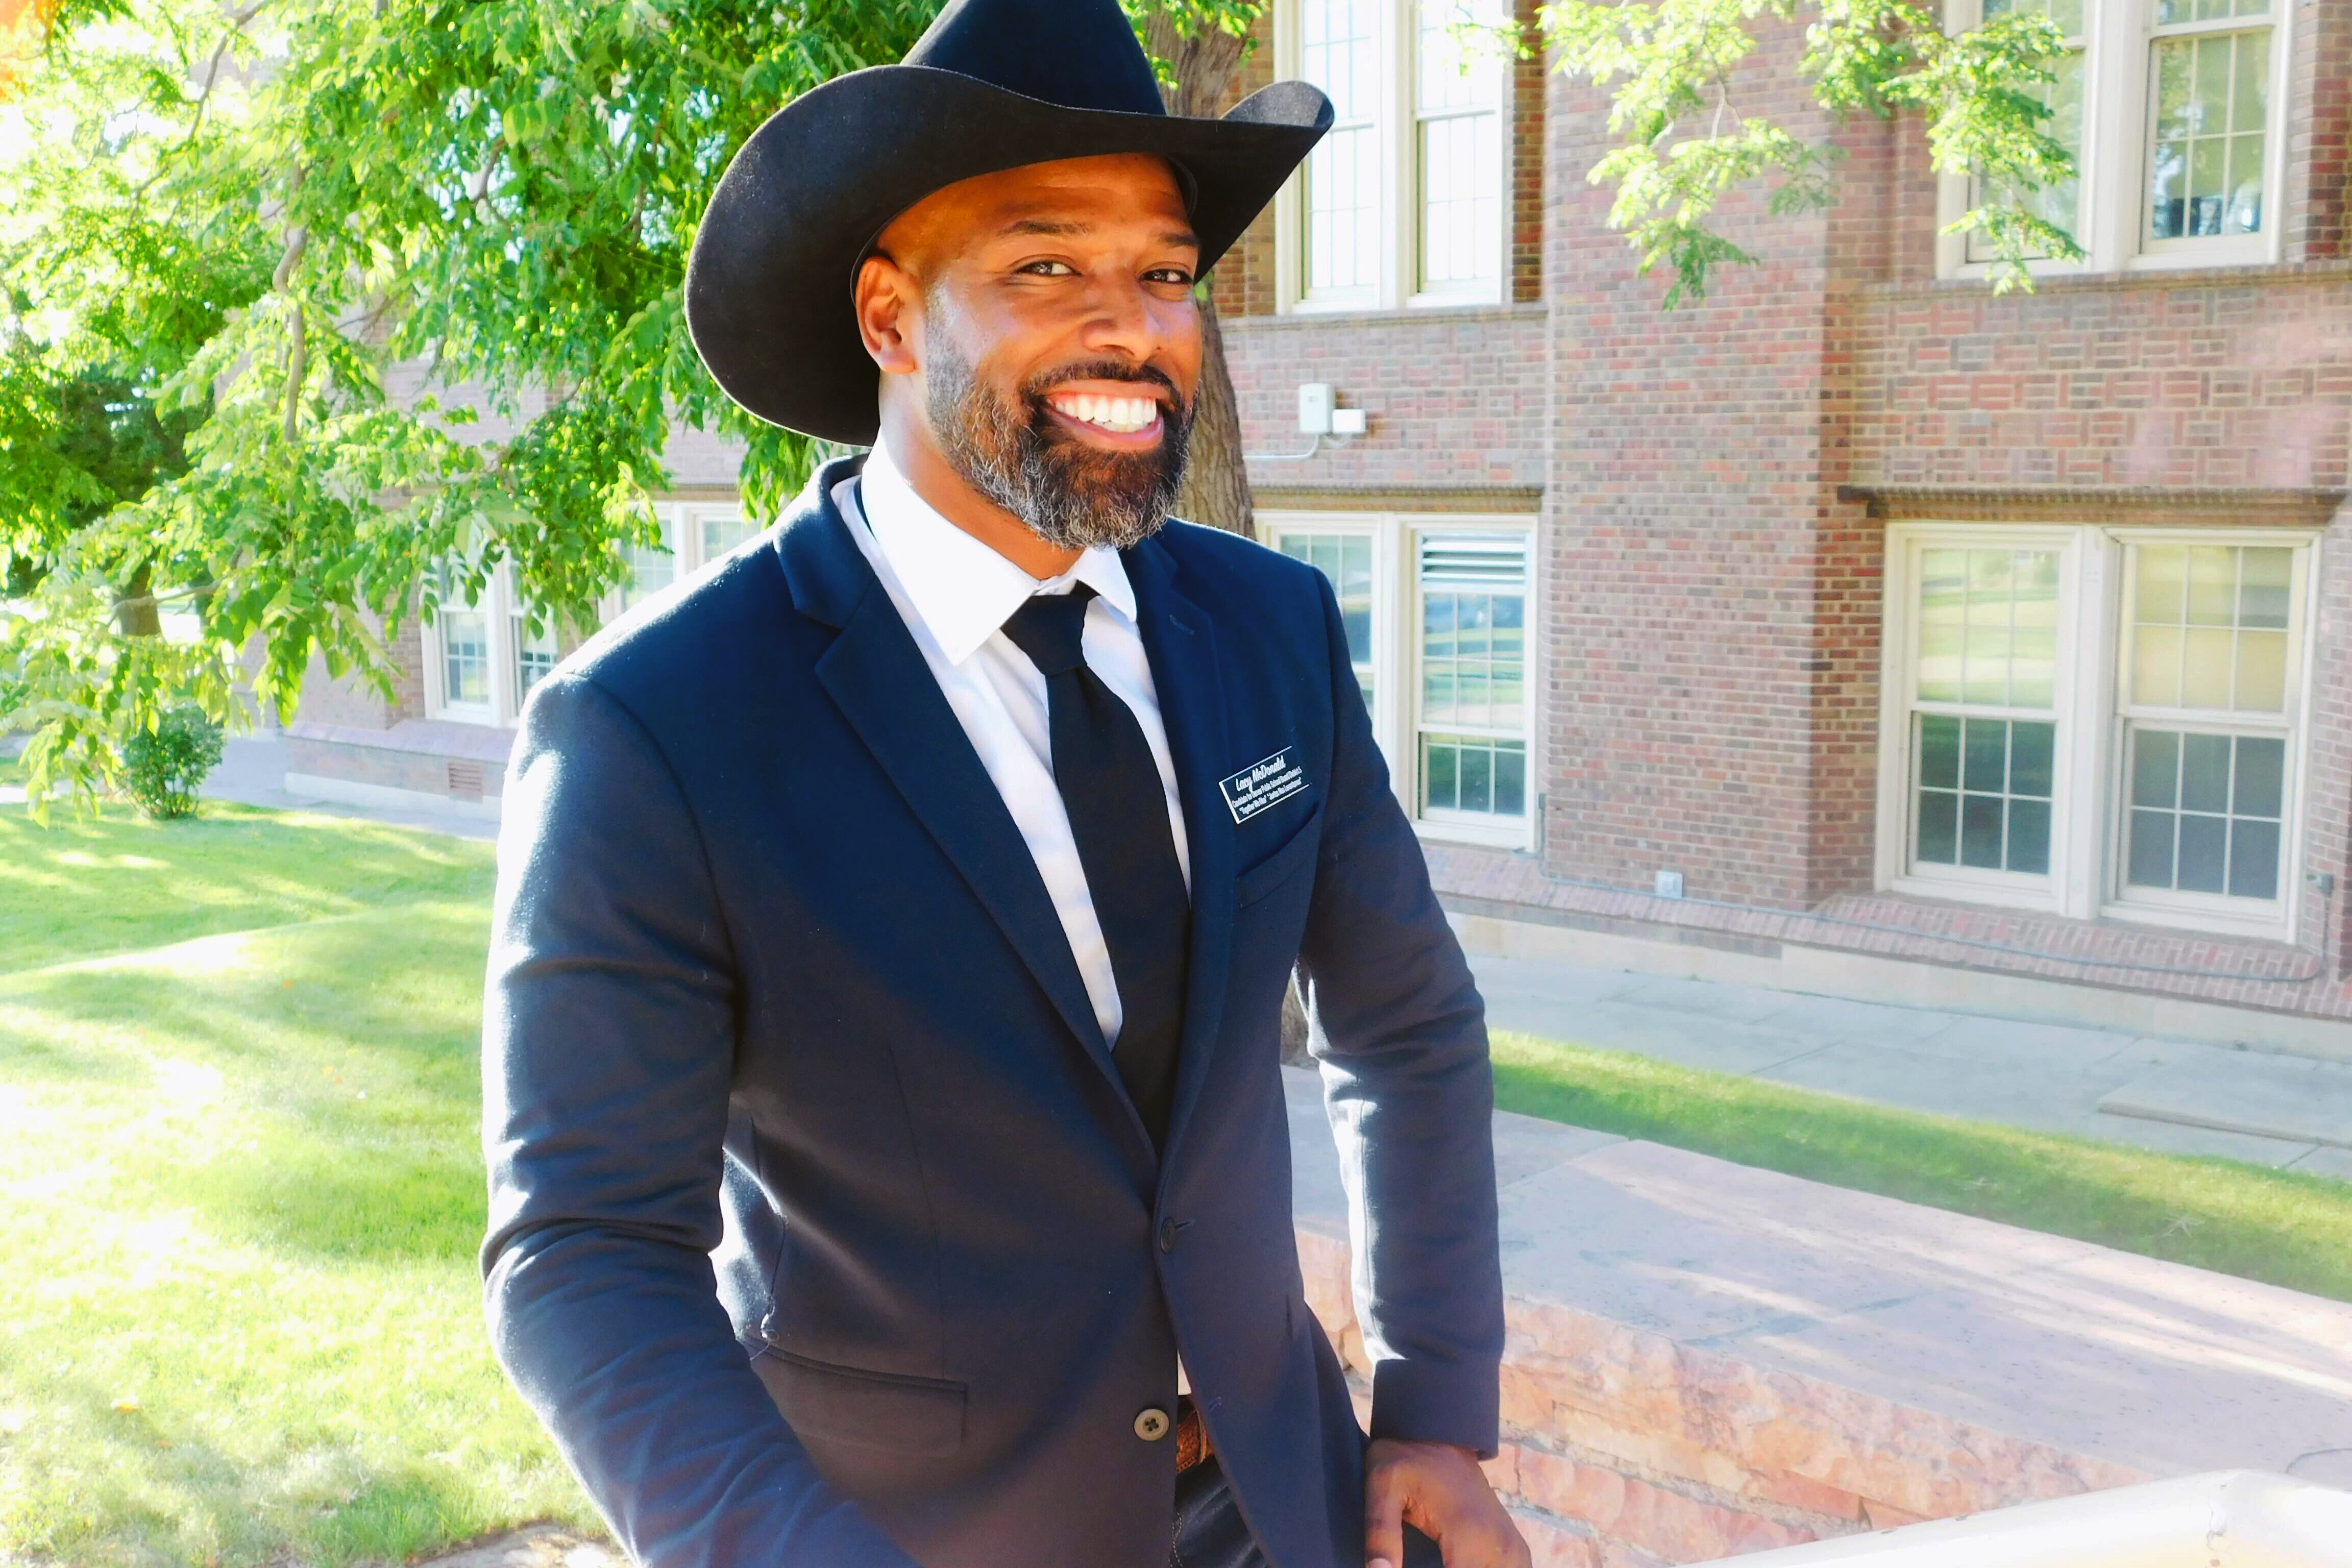 Images shows Lacy McDonald posing in front of a school. He is a Black man wearing a dark suit and a cowboy hat. He has a neatly trimmed beard and a huge smile on his face.